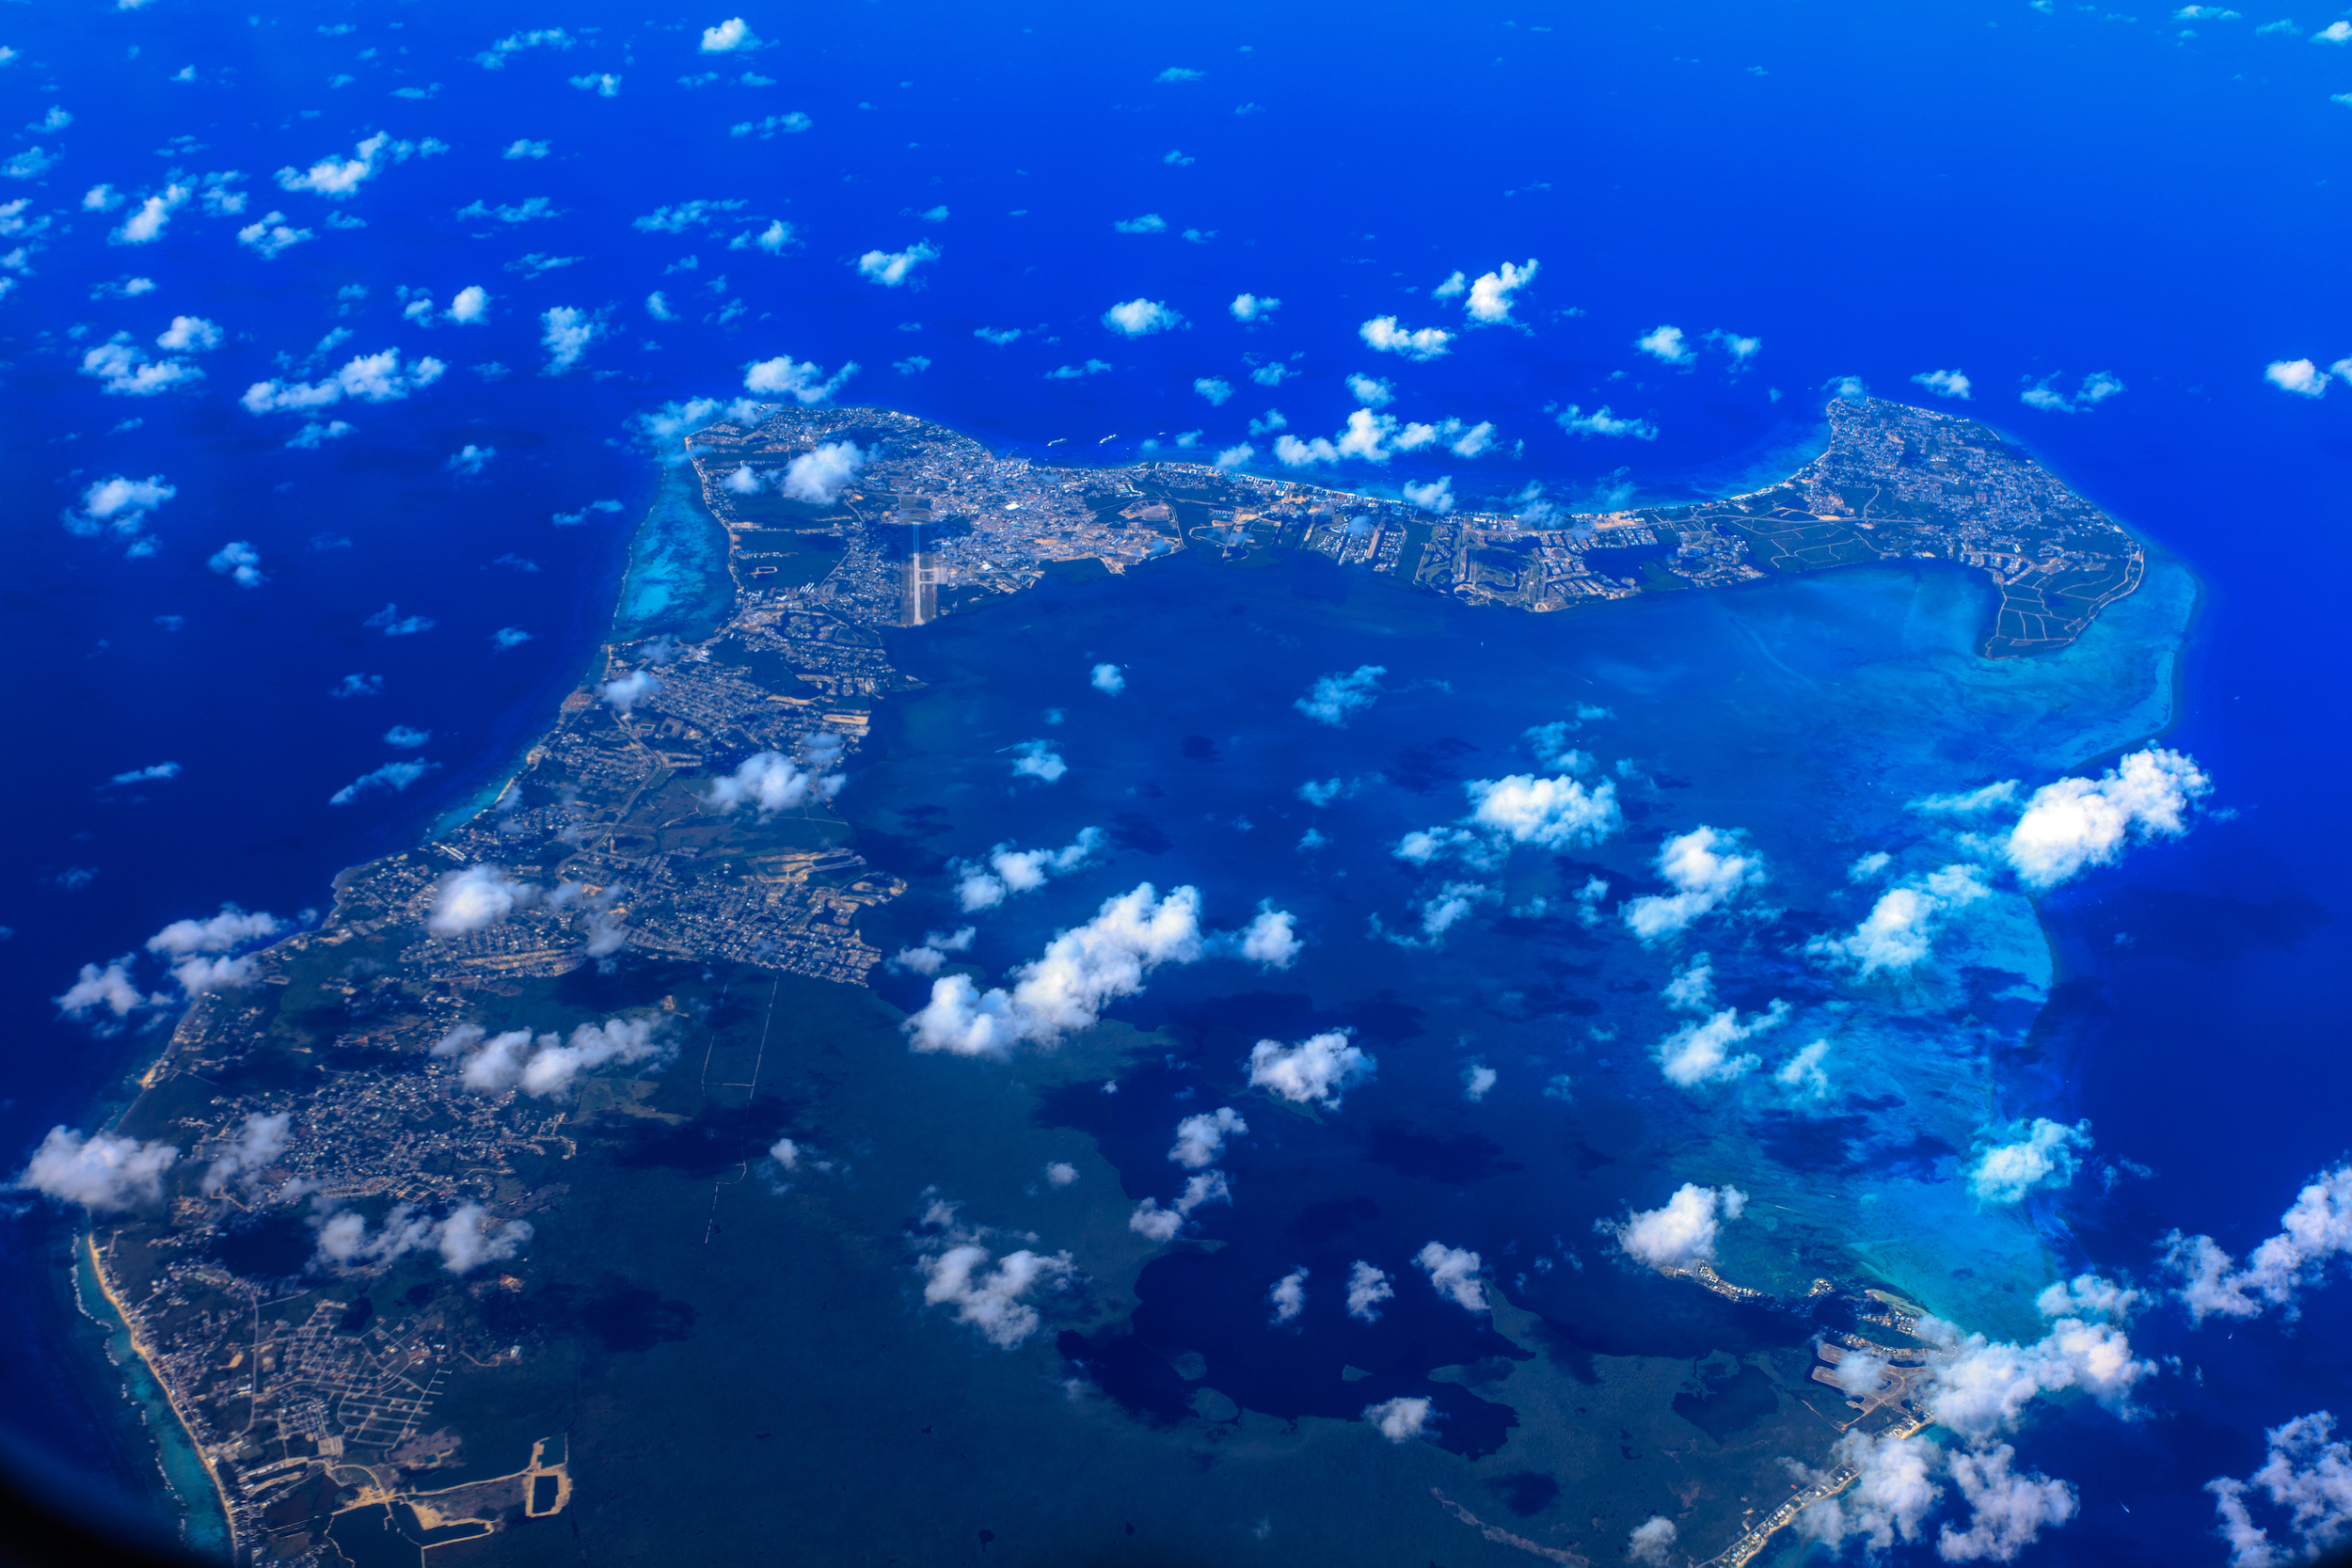 Cayman Islands • Country facts • PopulationData.net